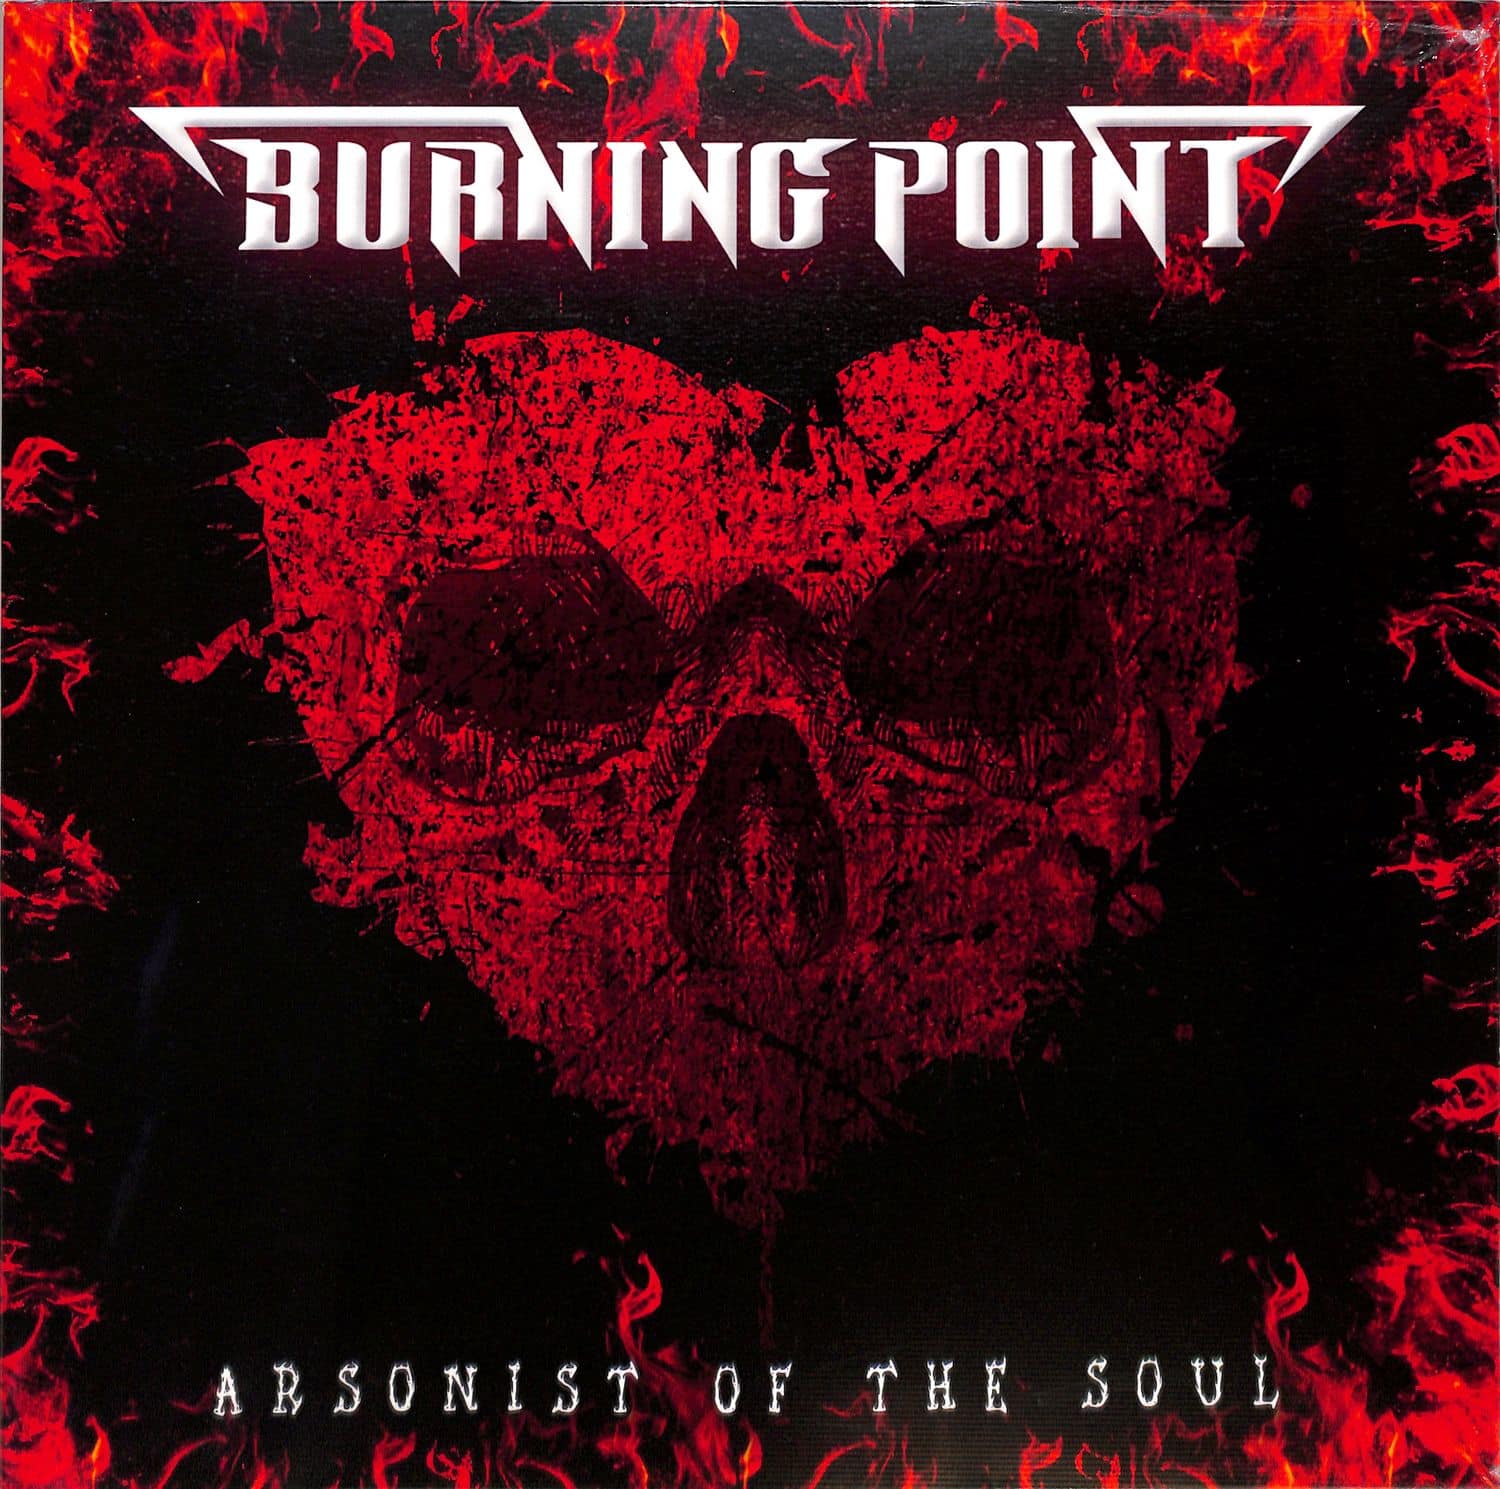 Burning Point - ARSONIST OF THE SOUL 